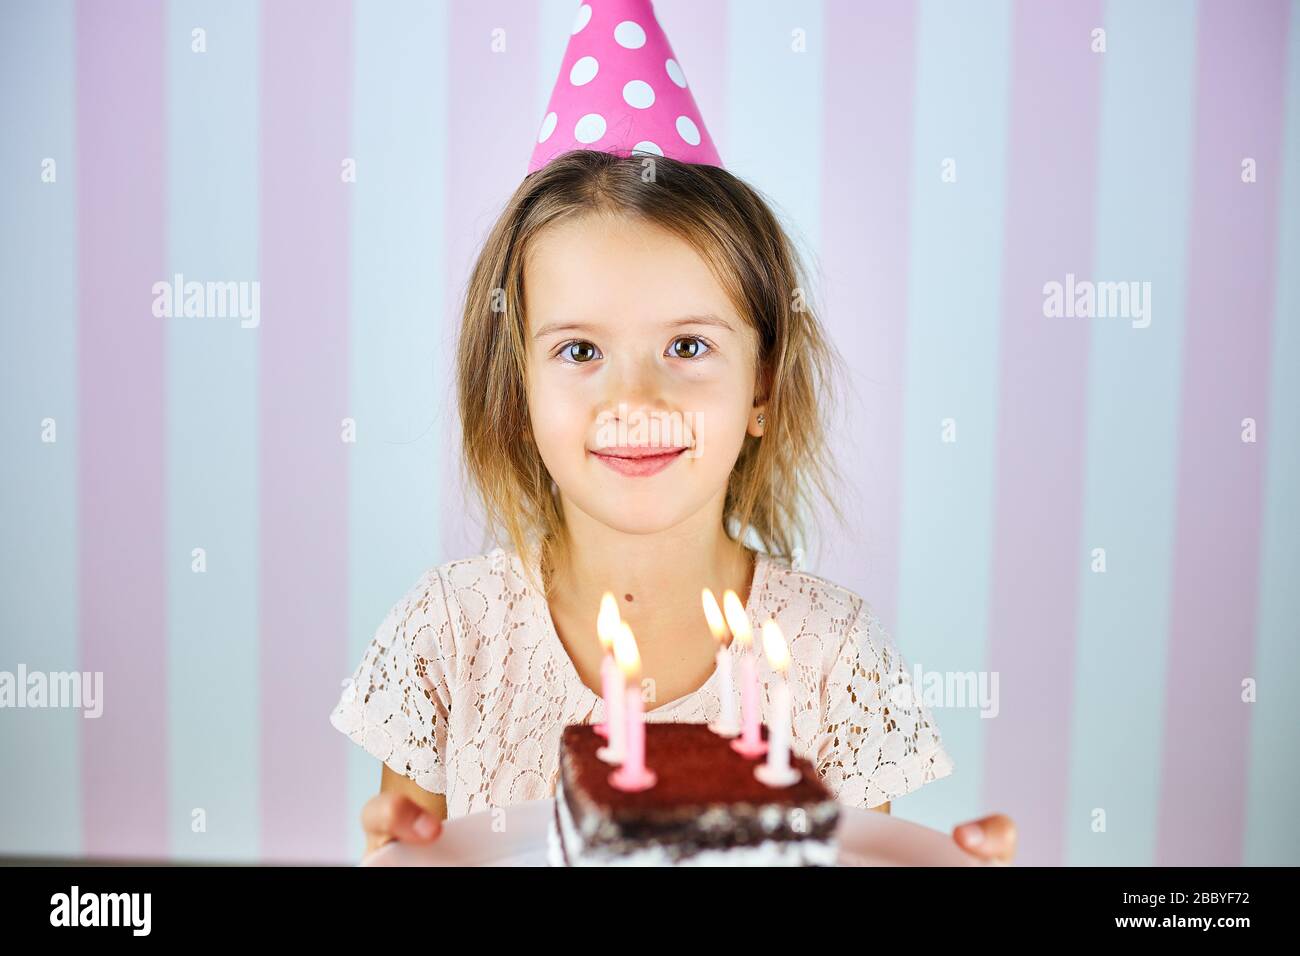 Little blonde girl smiling in birthday pink cap, a chocolate birthday ...